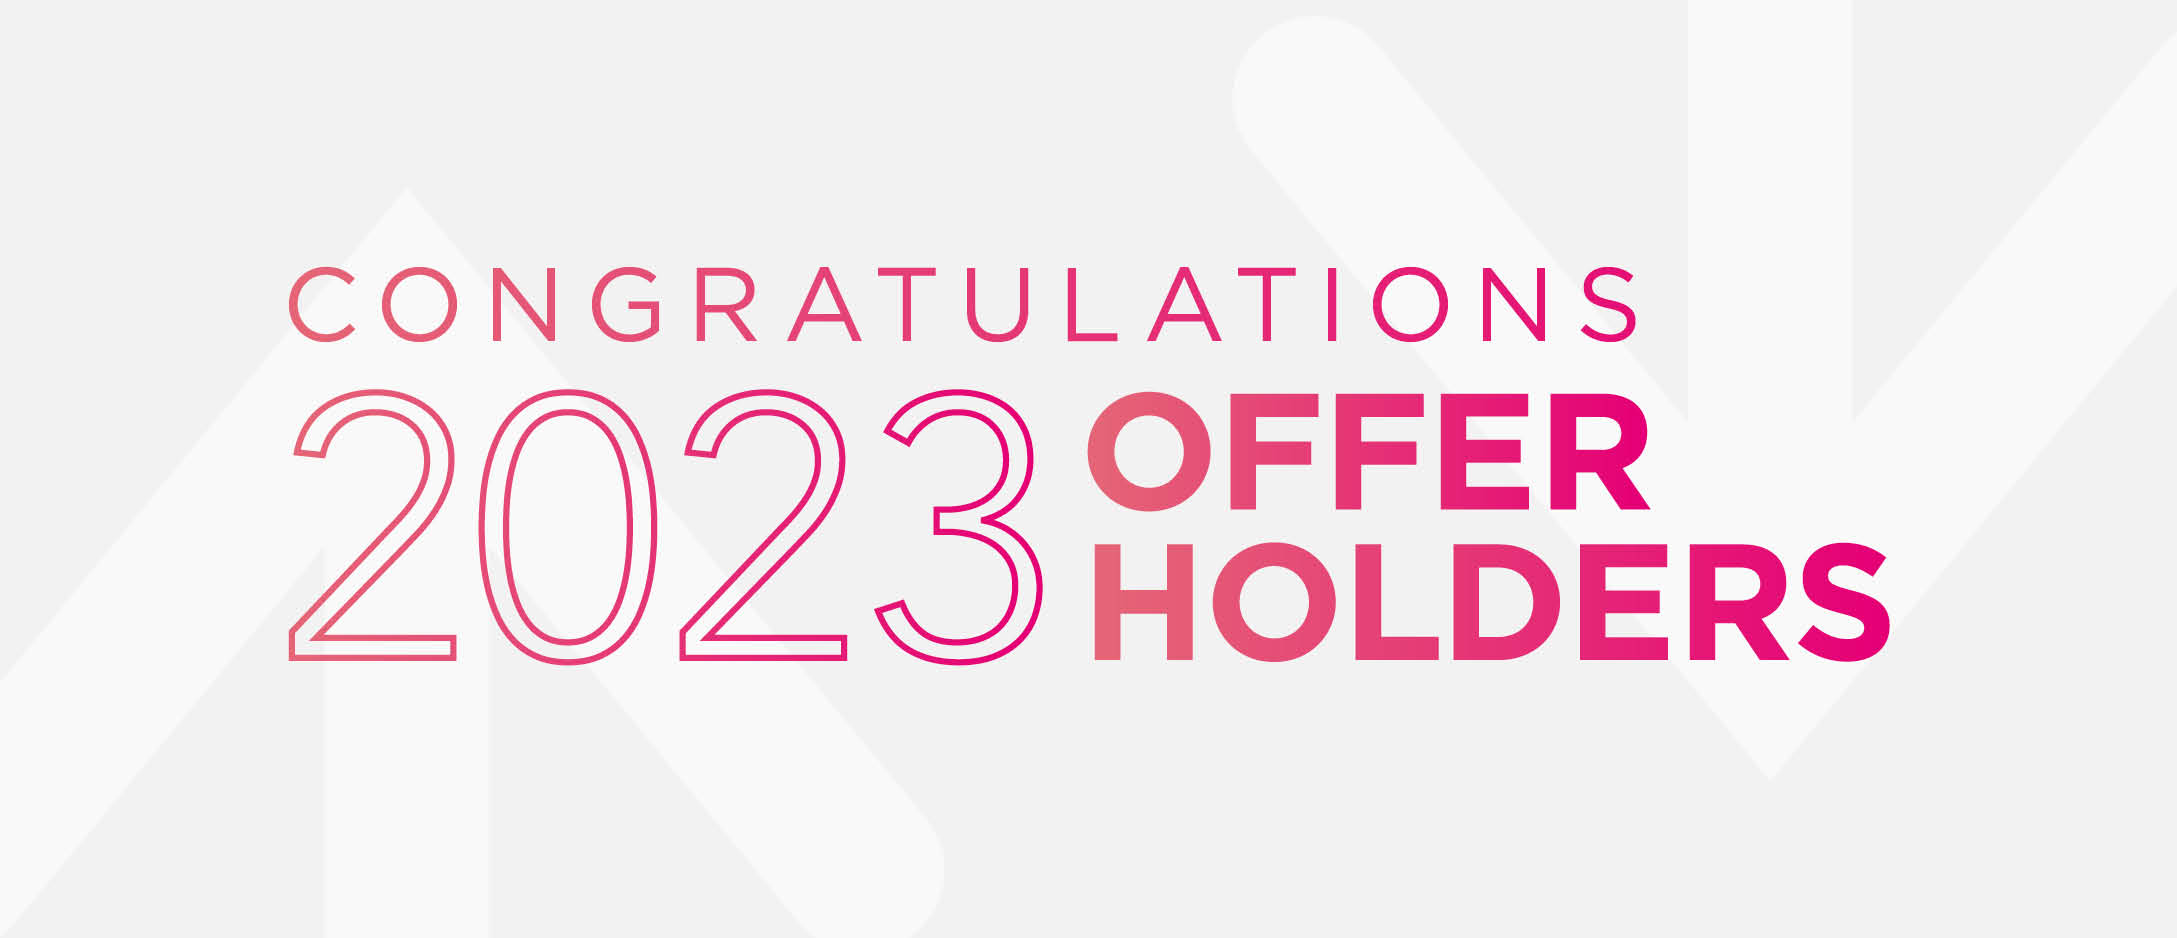 Grey image with pink writing - Congratulations 2023 Offer Holders